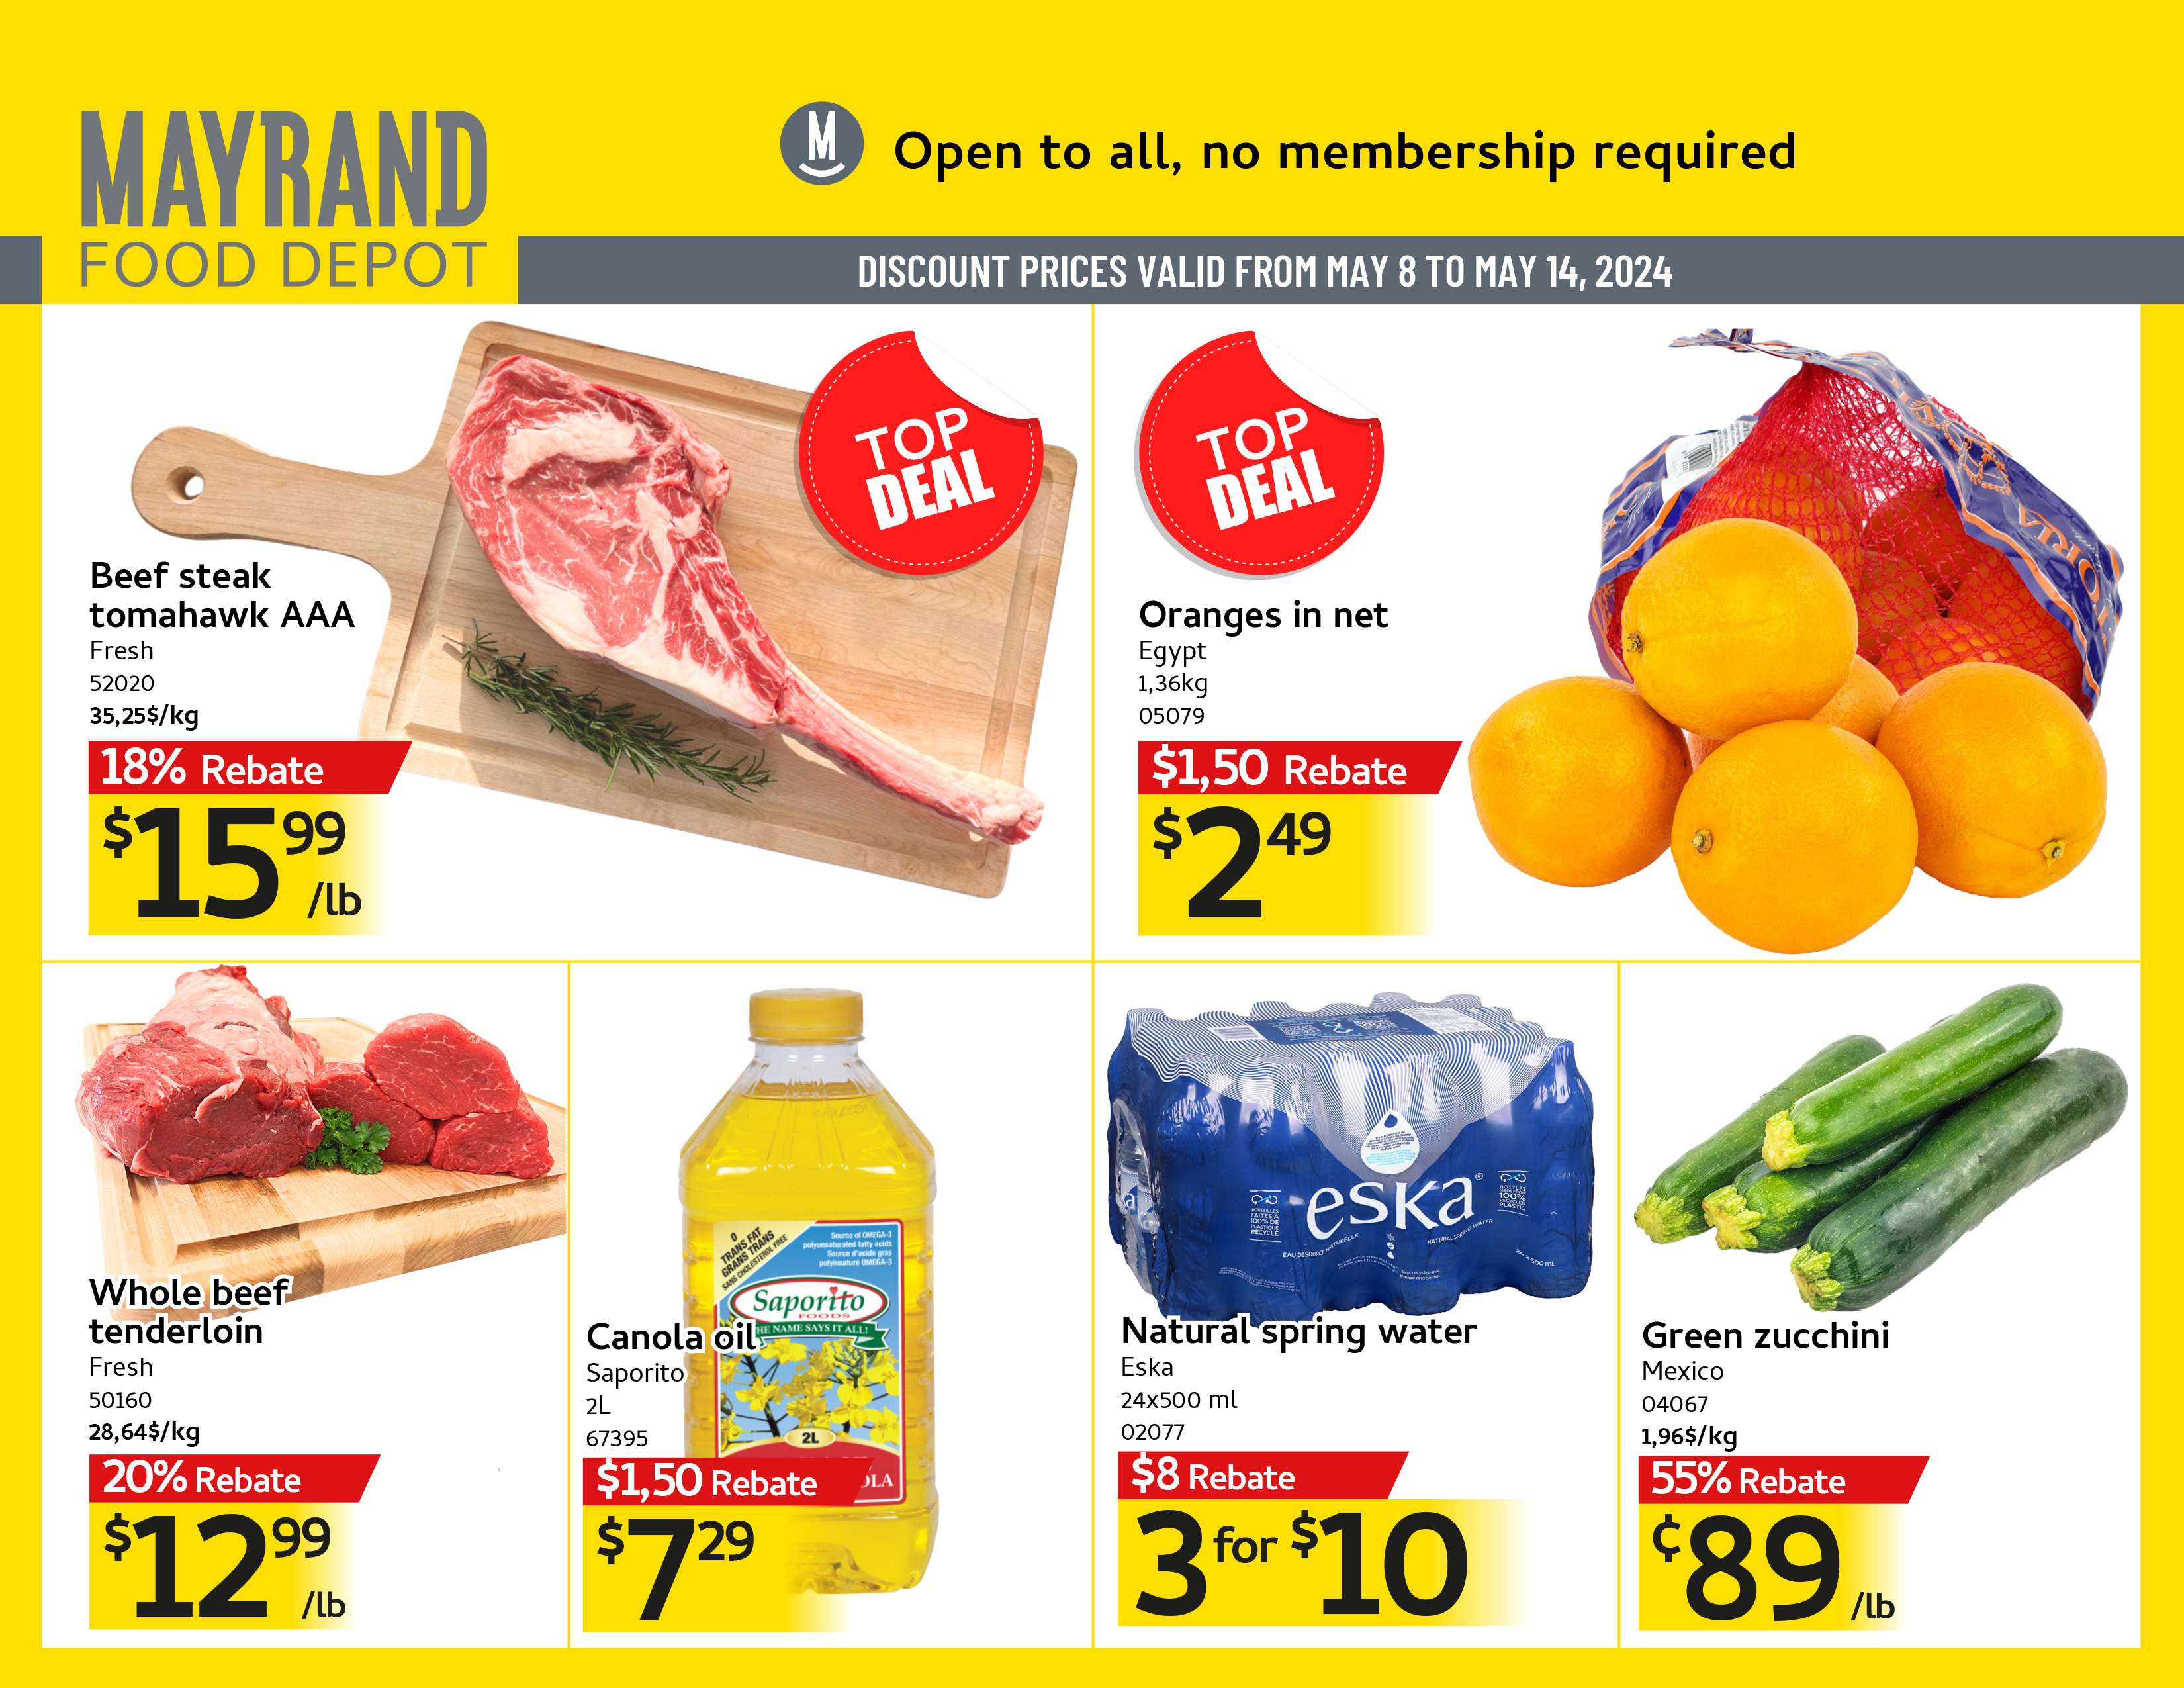 Weekly Special Prices | Mayrand Food Depot